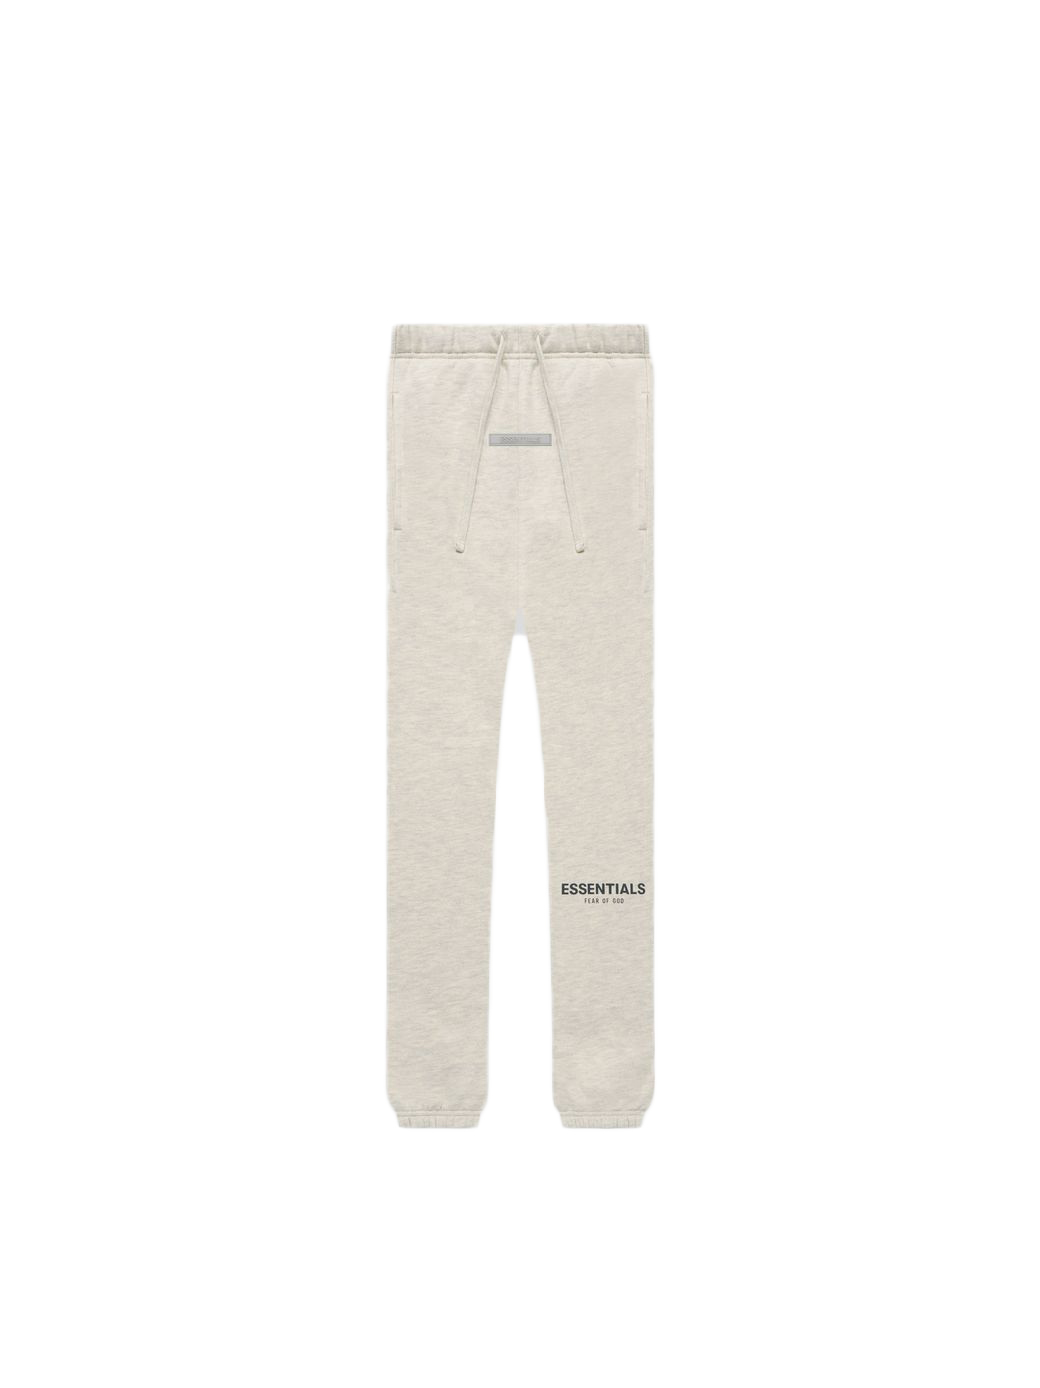 Fear of God Essentials Core Collection Sweatpant String Men's